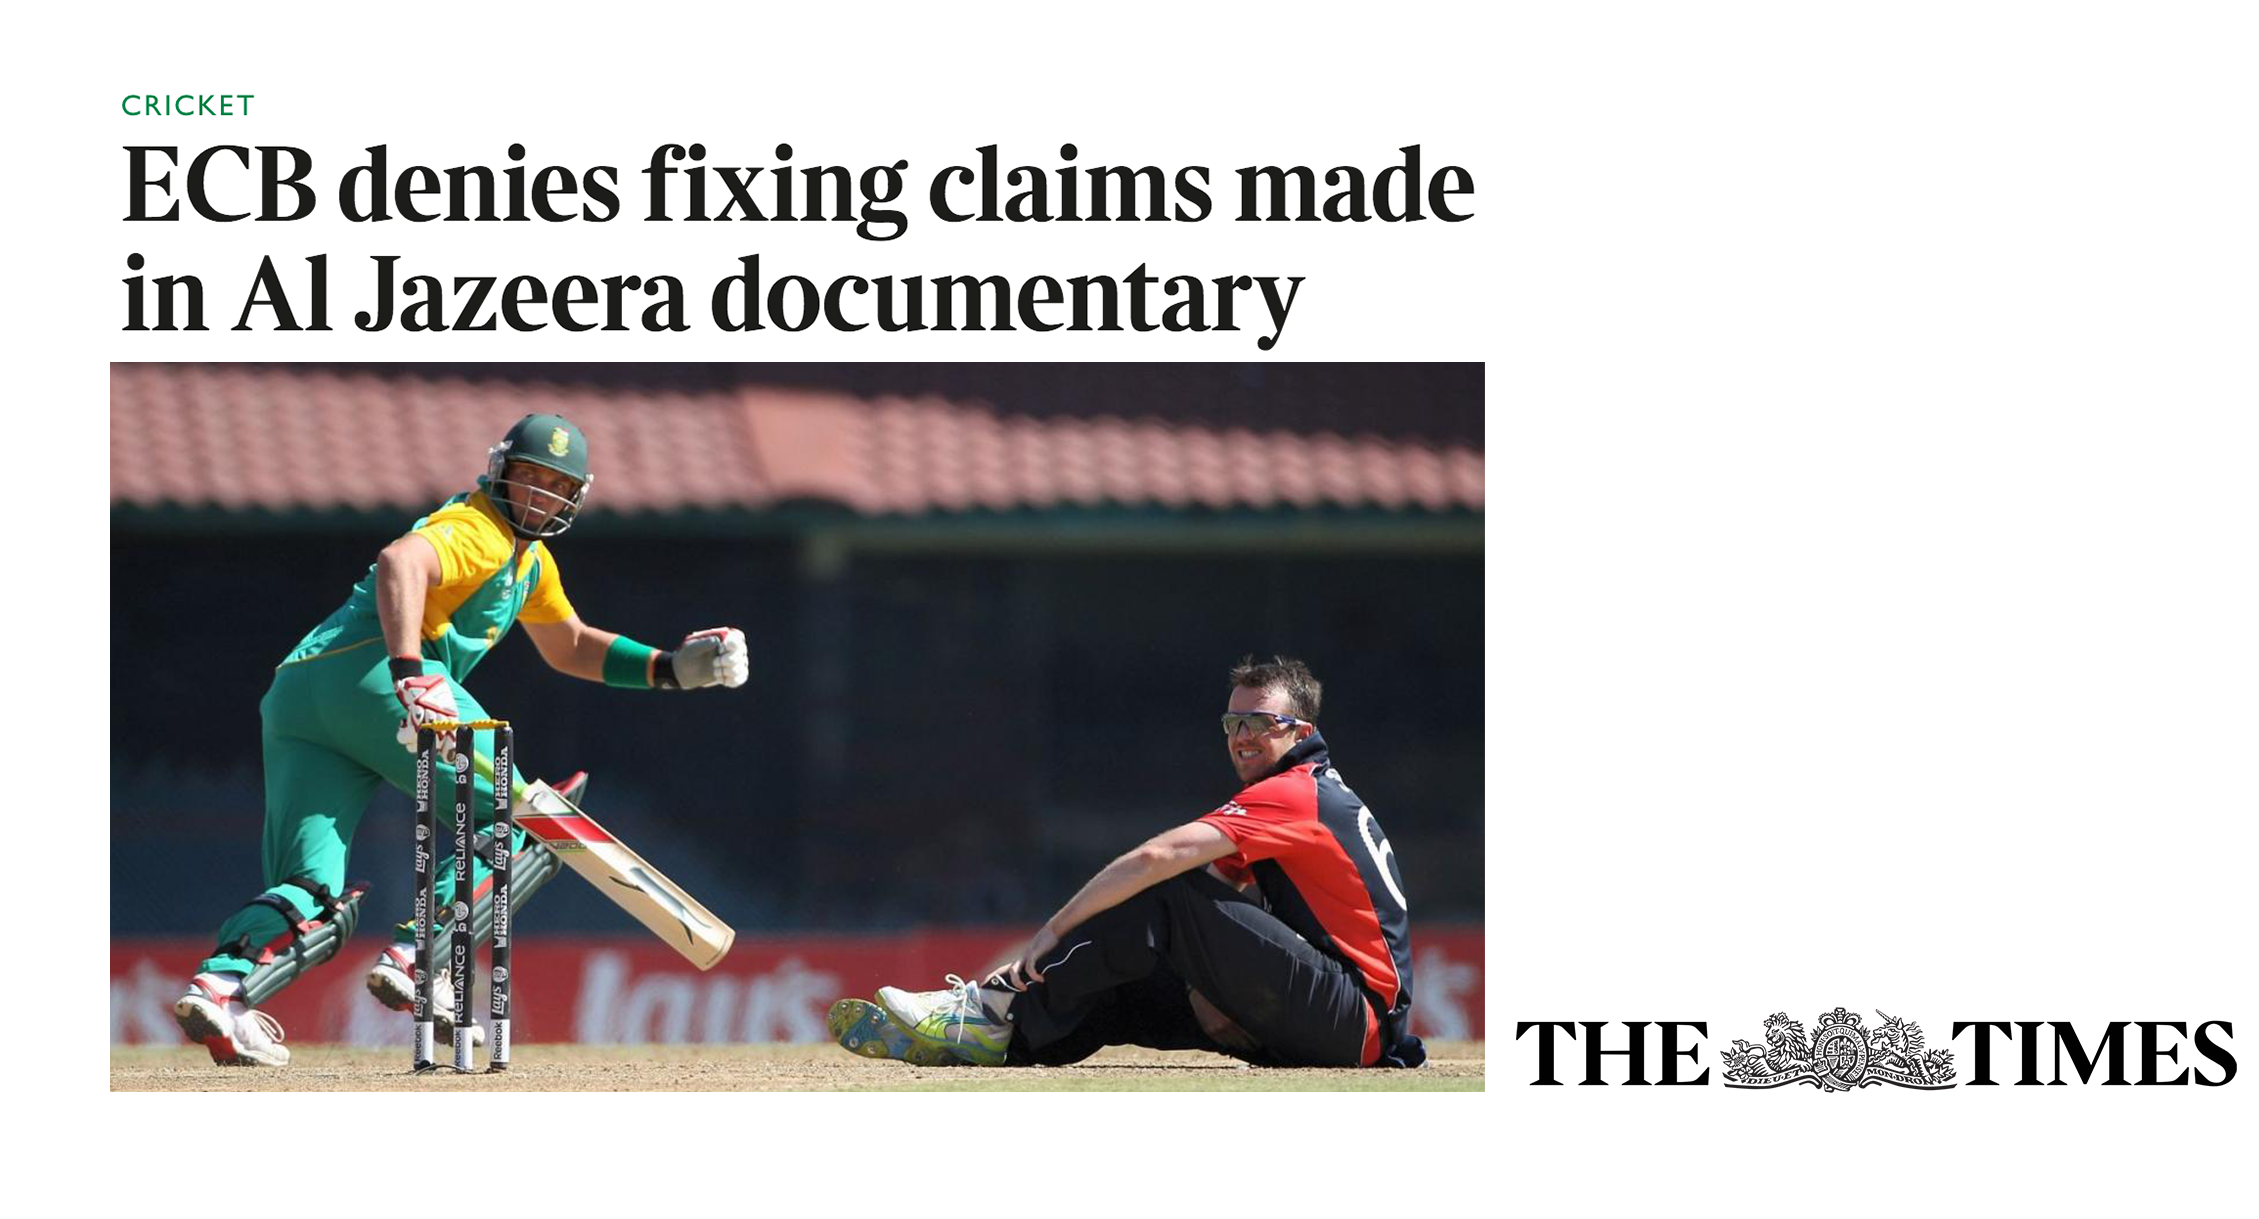 The Times: England players among top cricketers in new ‘spot-fixing’ claims